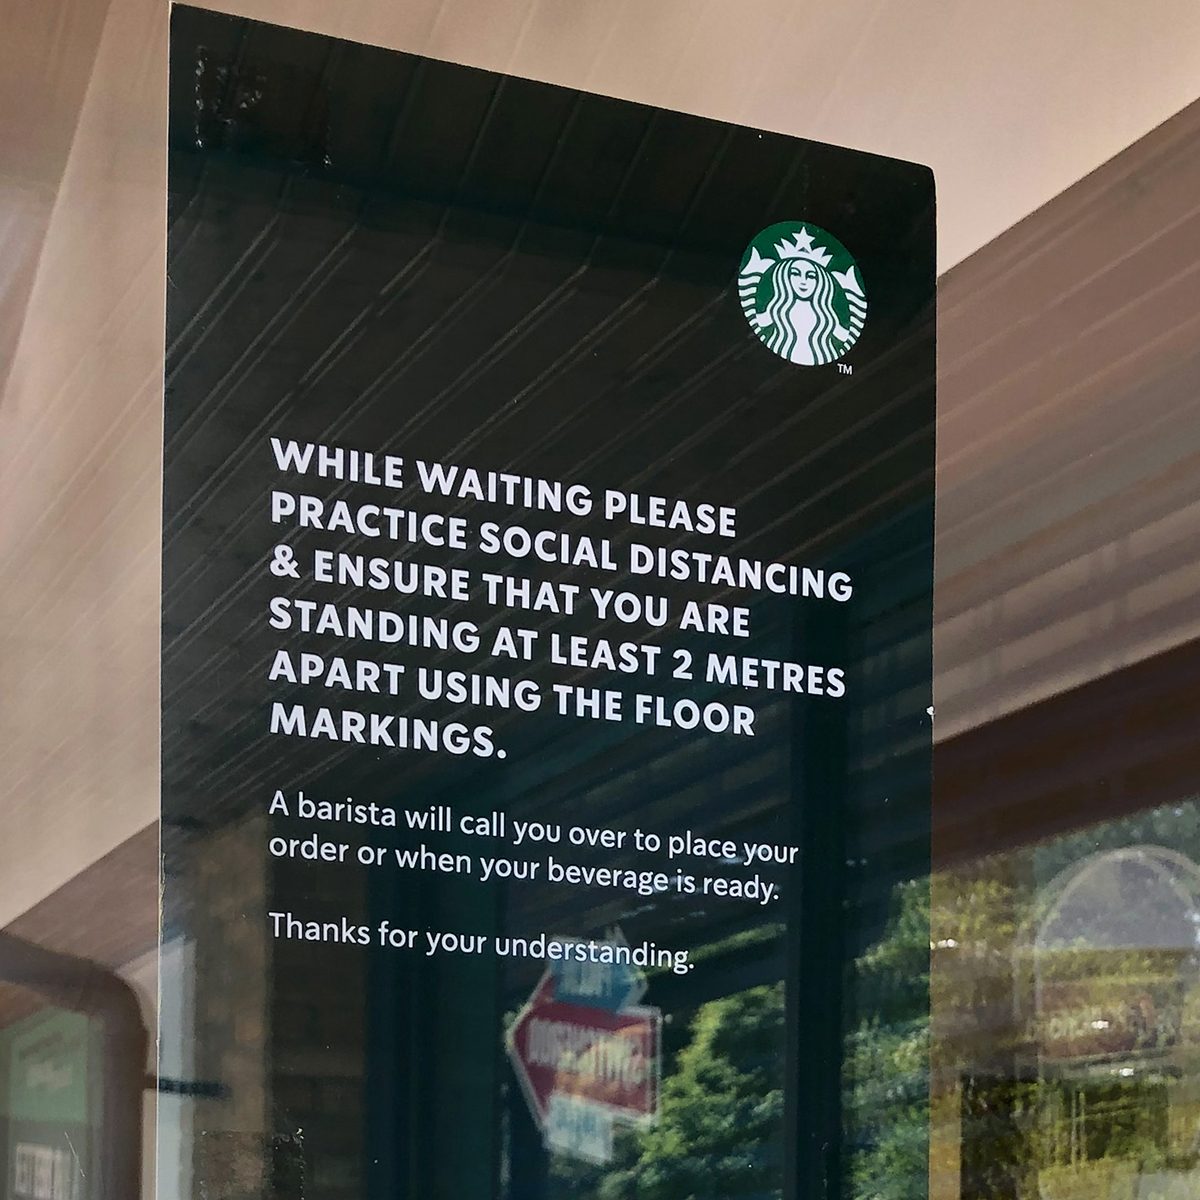 SOUTHAMPTON, ENGLAND - MAY 15: (EDITORS NOTE - This image was taken on a mobile phone) A sign encouraging social distancing is seen on a window of Starbucks in Hedge End as it re-opens on May 15, 2020 in Southampton, England. The prime minister announced the general contours of a phased exit from the current lockdown, adopted nearly two months ago in an effort curb the spread of Covid-19. (Photo by Naomi Baker/Getty Images)